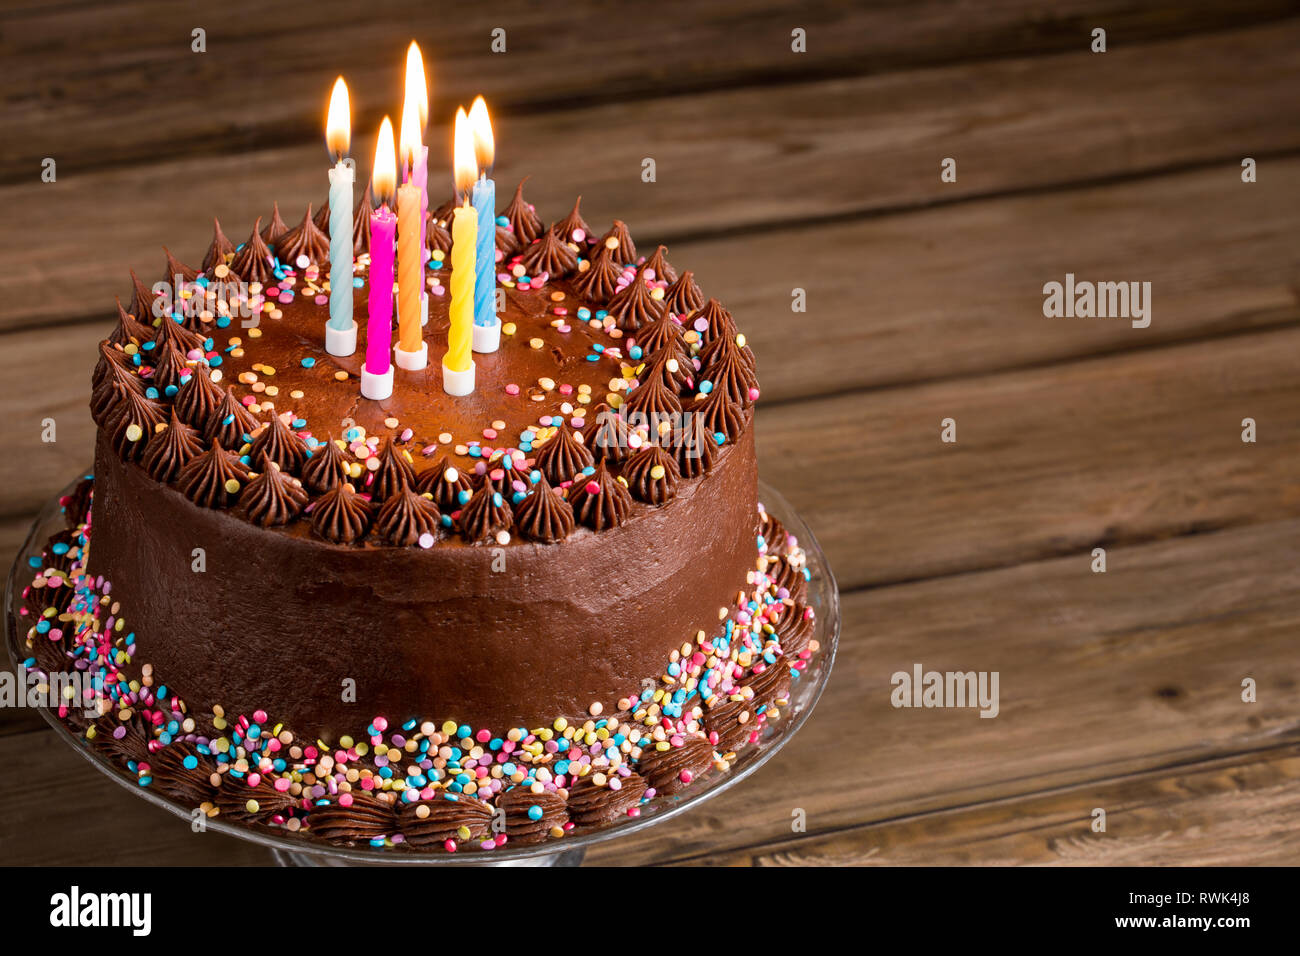 Chocolate birthday cake with colorful sprinkles and candles over ...